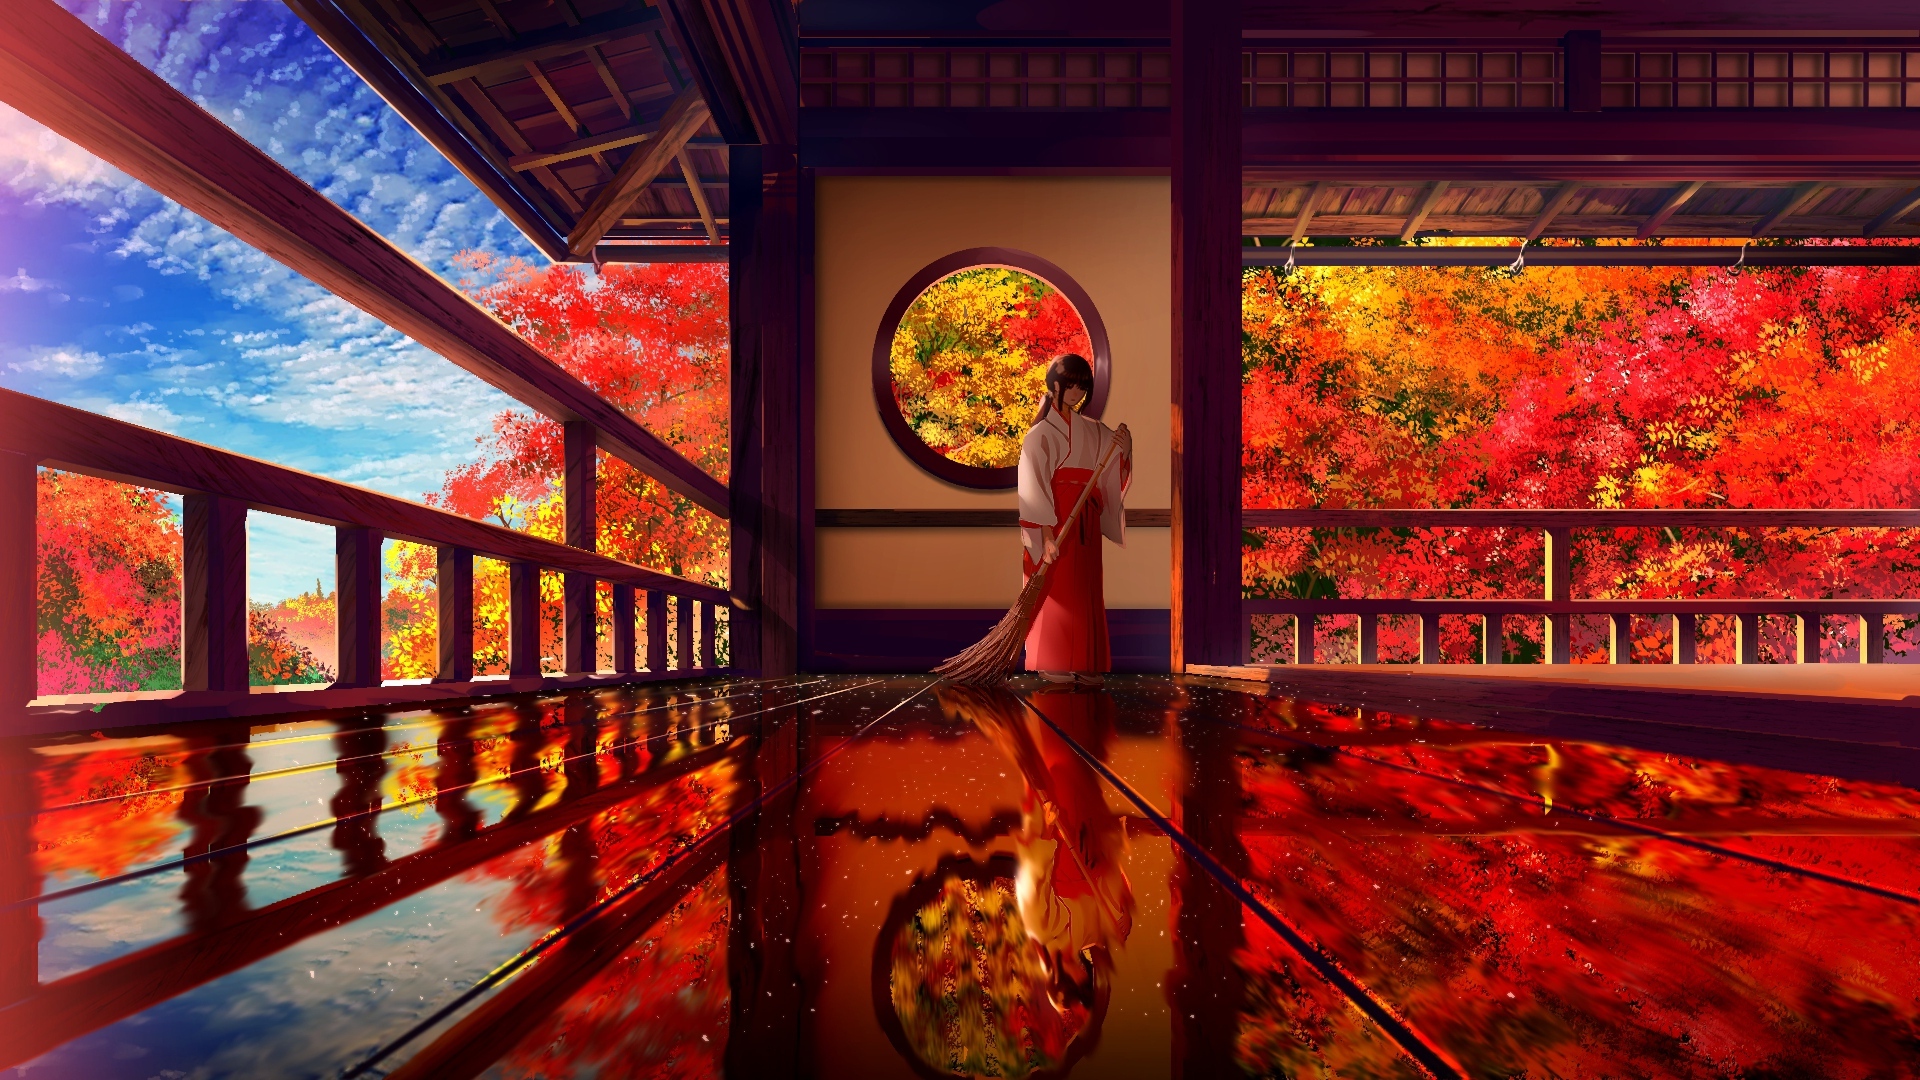 Wallpaper Fall, Anime Girl, Traditional Japanese Building, Miko, Autumn:1920x1080